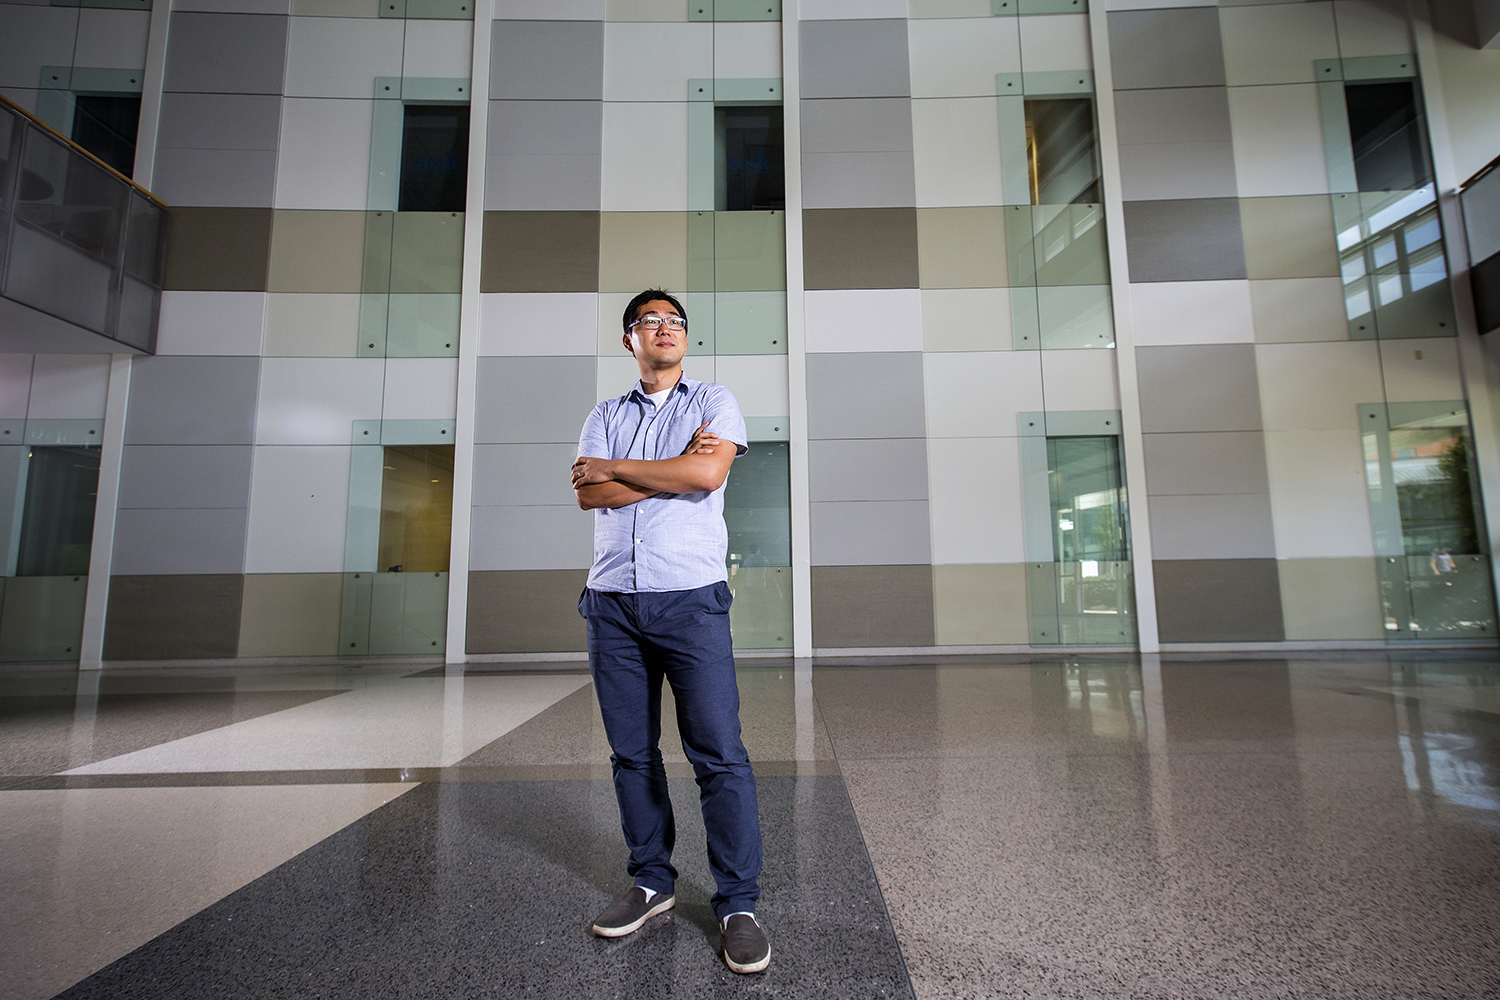 Georgia Tech Assistant Professor Taesoo Kim and a team of researchers here recently earned a $2.9 million DARPA contract to study ways of detecting and defending against low-volume distributed denial of service (DDoS) attacks on websites.